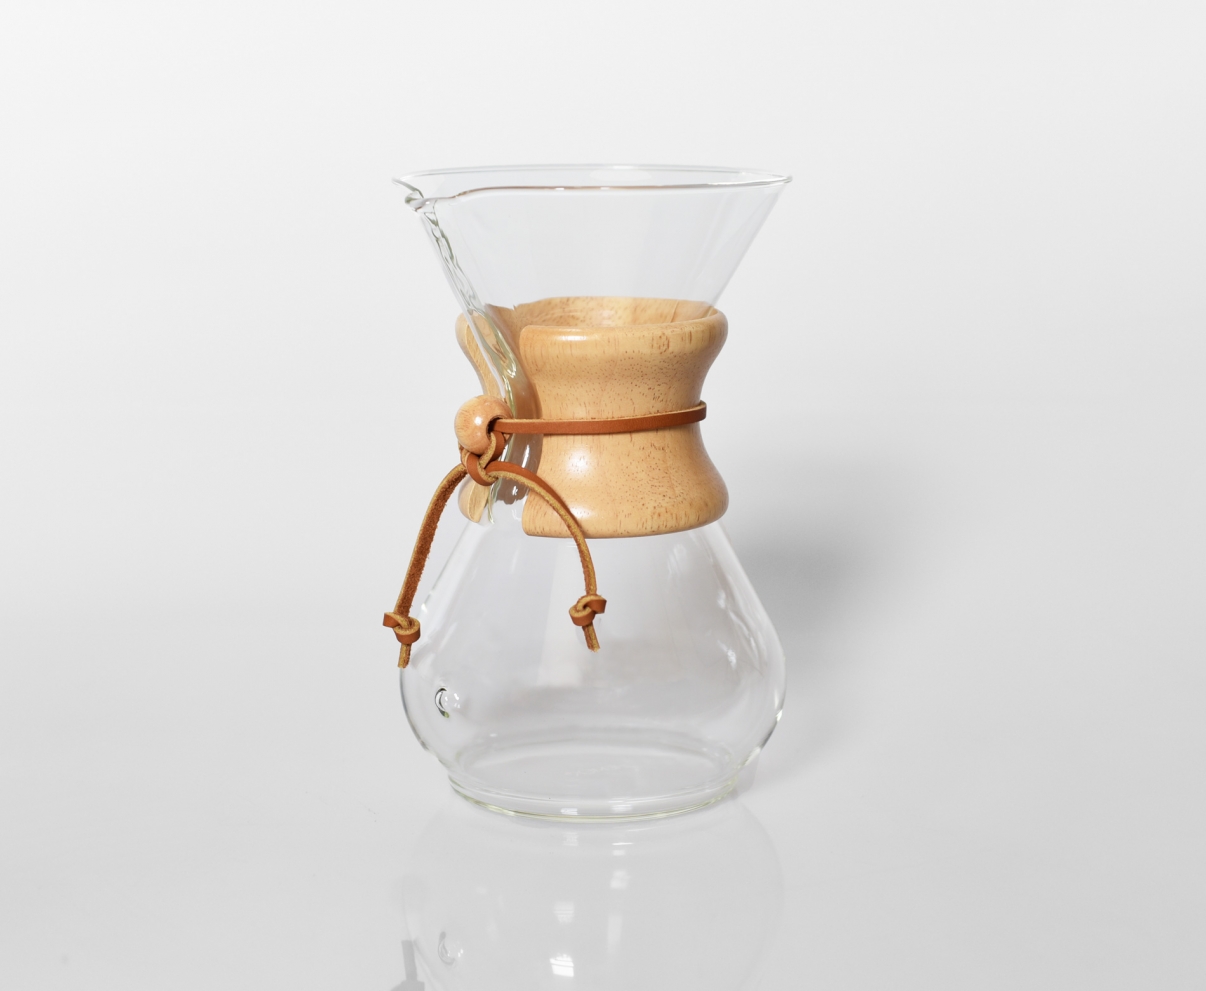 The Coffee Officina Chemex Coffee Maker 6 cups